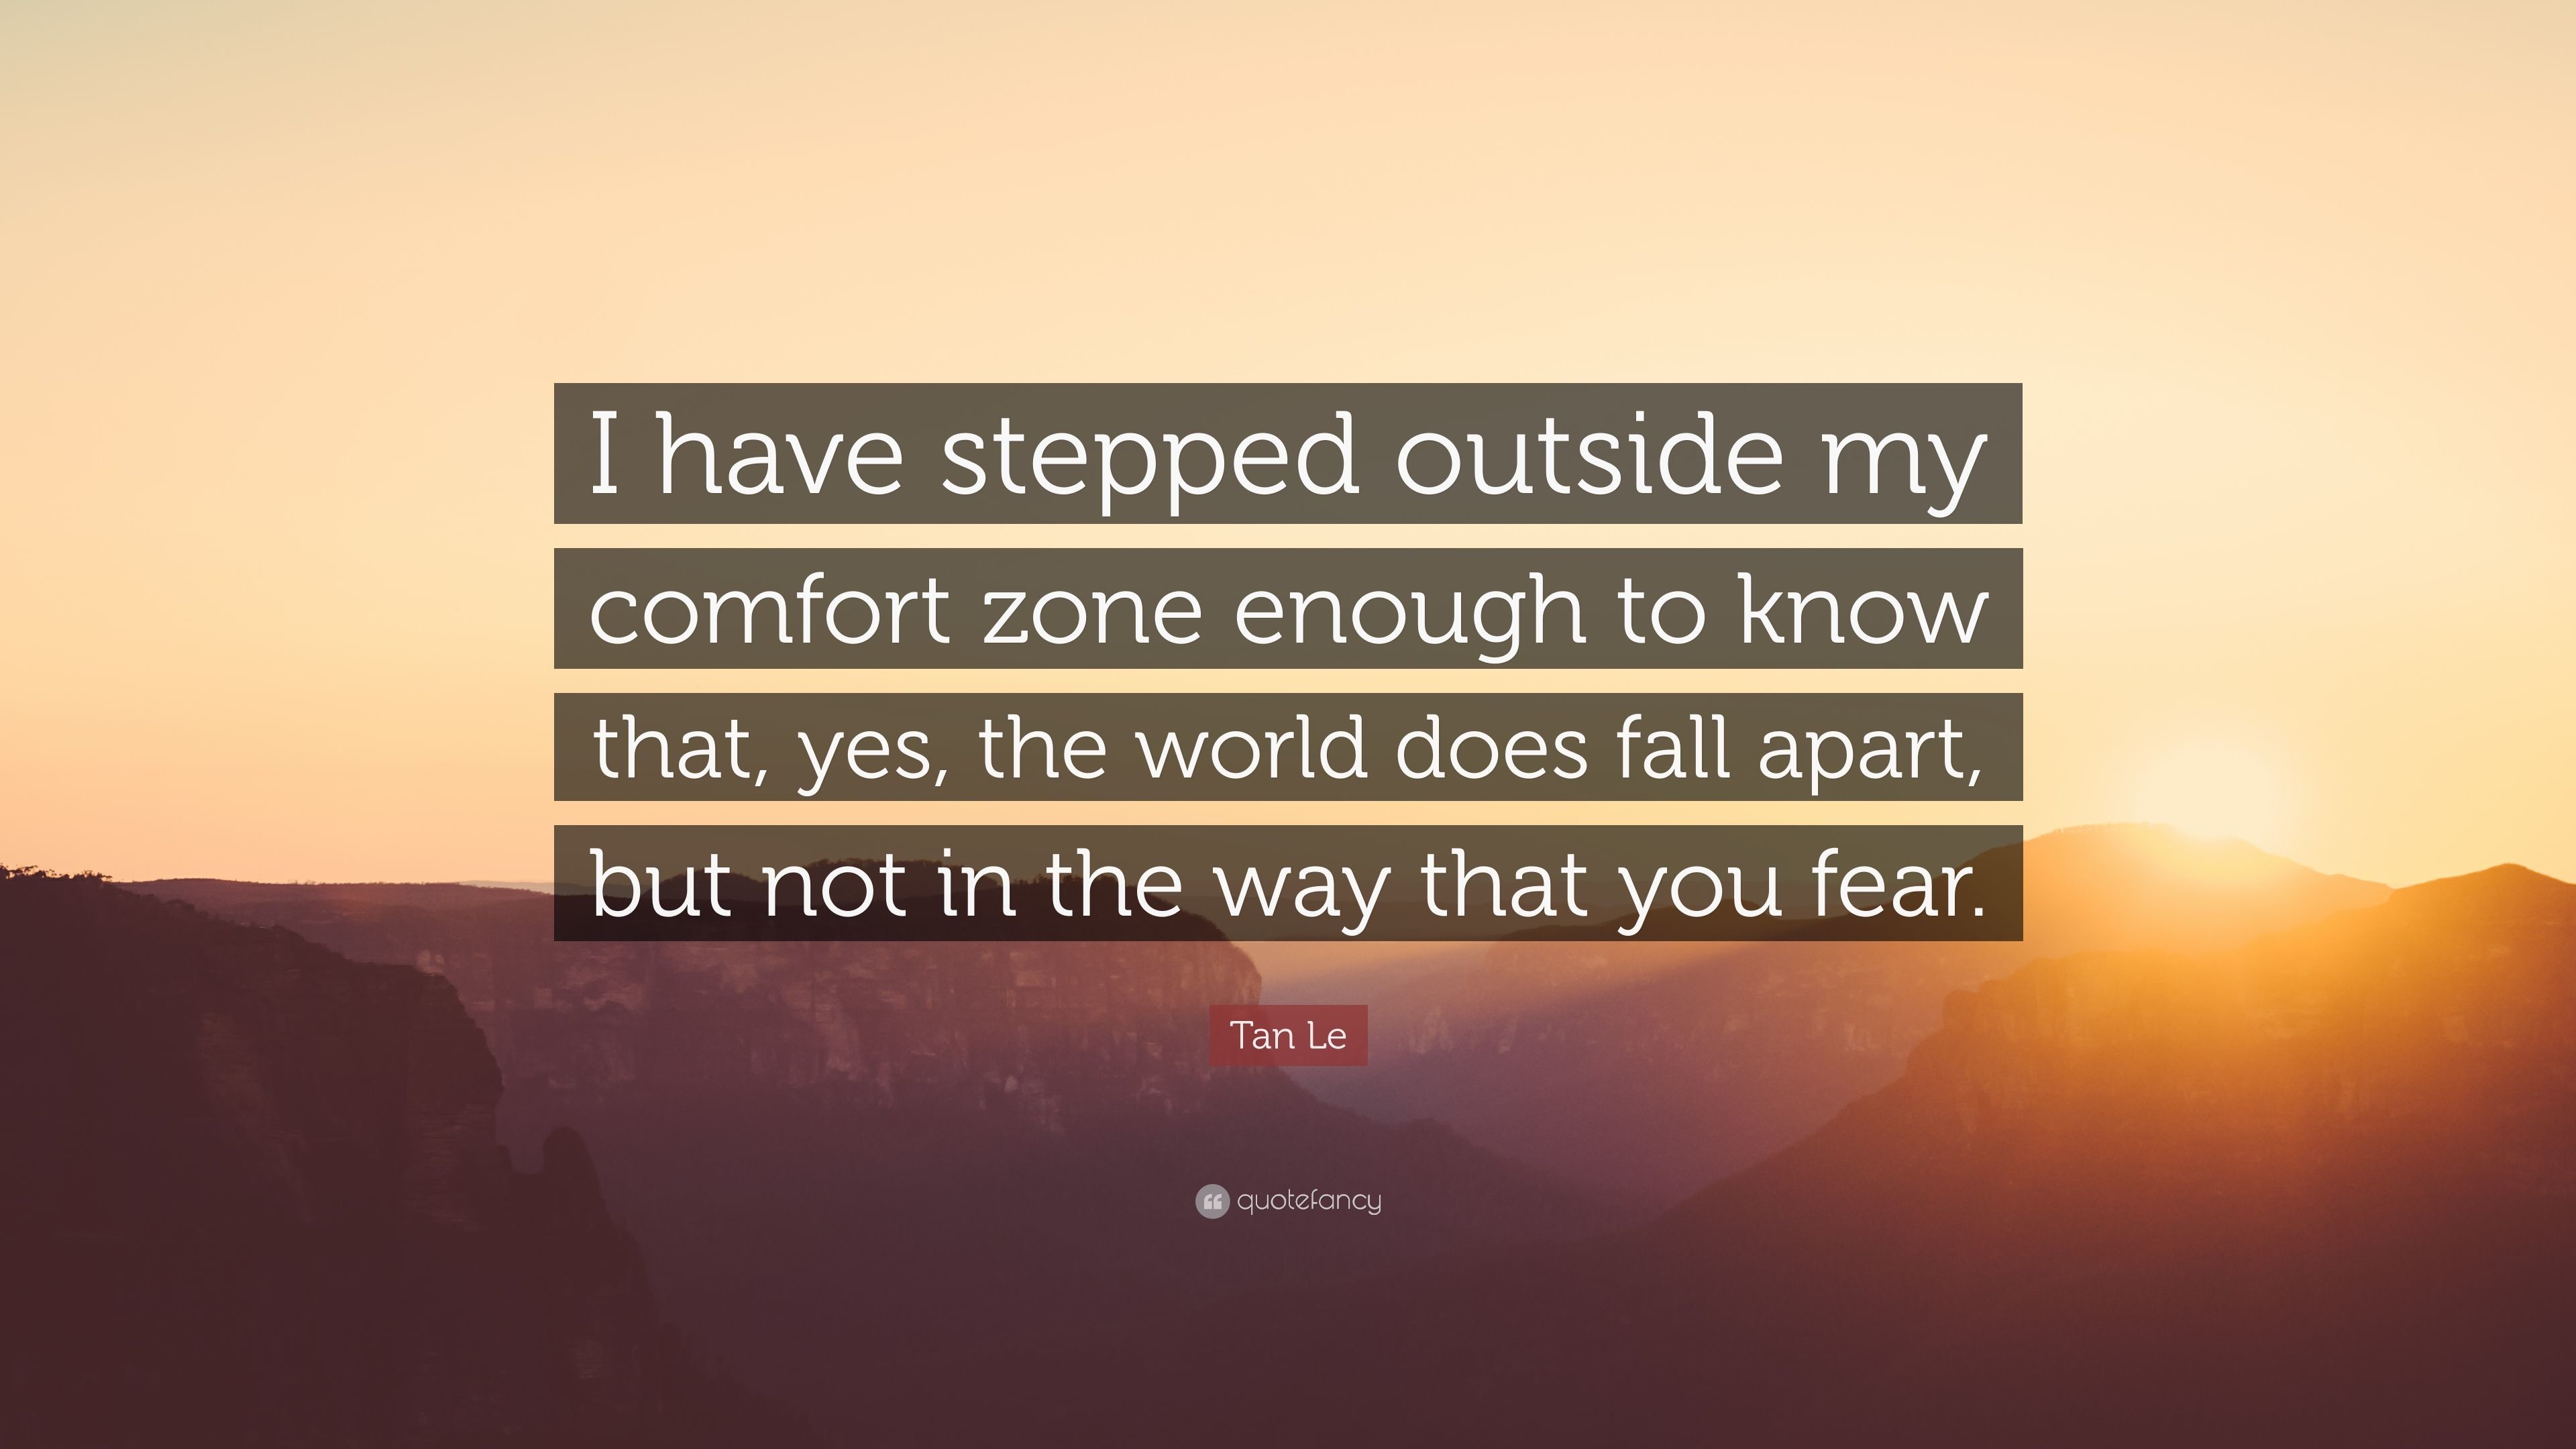 3840x2160 Tan Le Quote: “I have stepped outside my comfort zone enough to know that